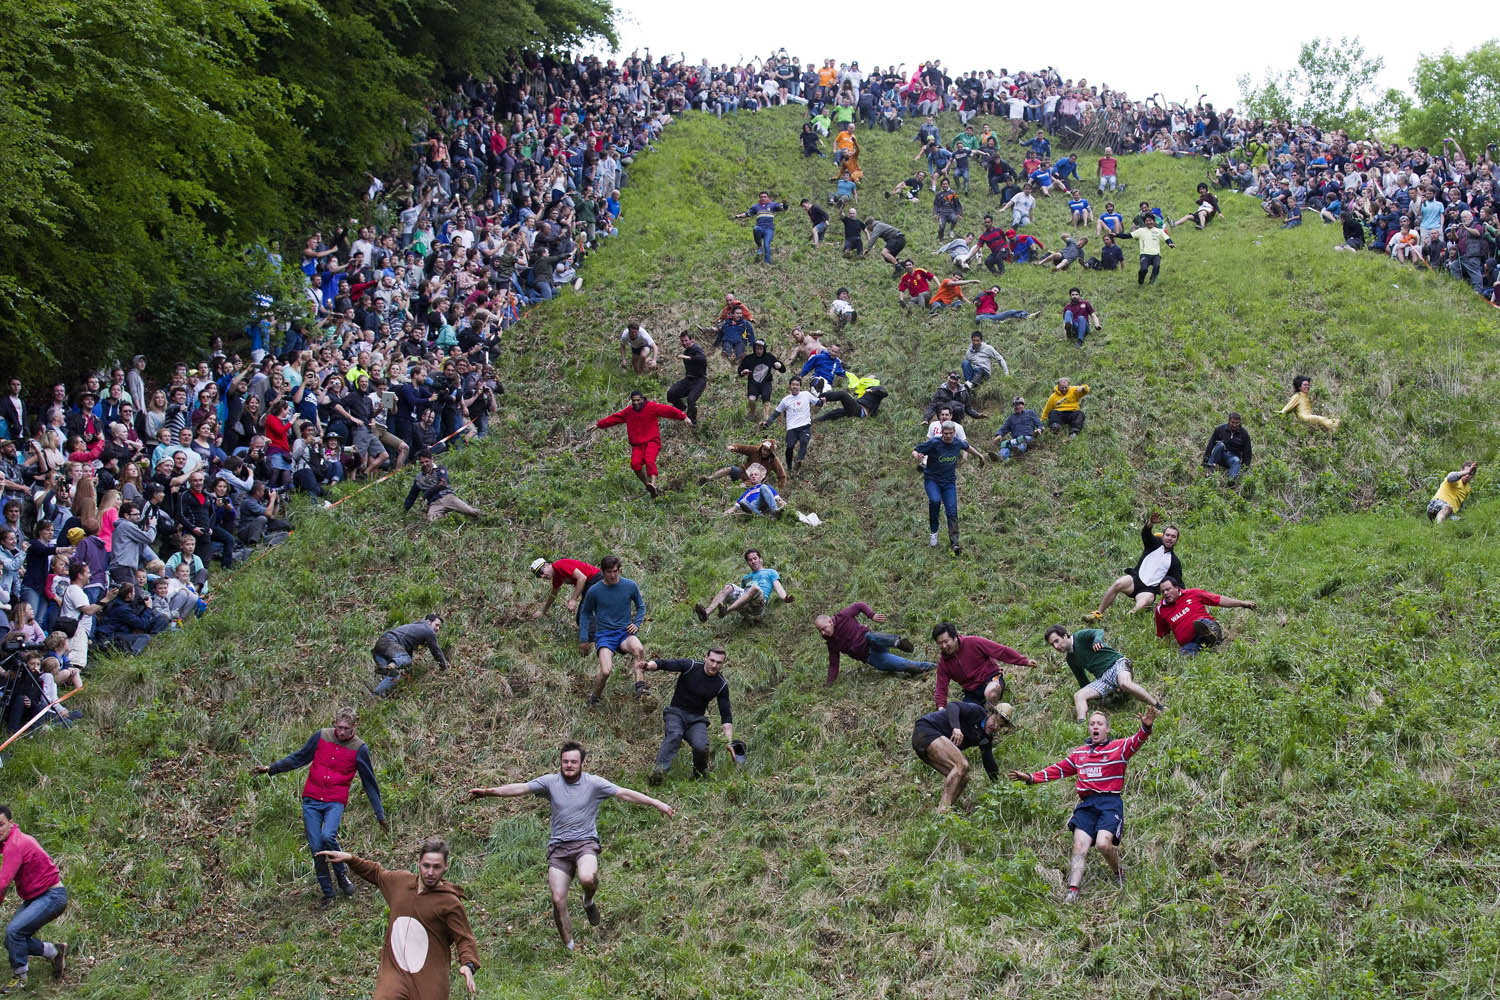 Competitors tumble down Coopers Hill in pursuit of a round Double Gloucester cheese during the annual cheese rolling and wake near the village of Brockworth near Gloucester in western England on May 26, 2014.